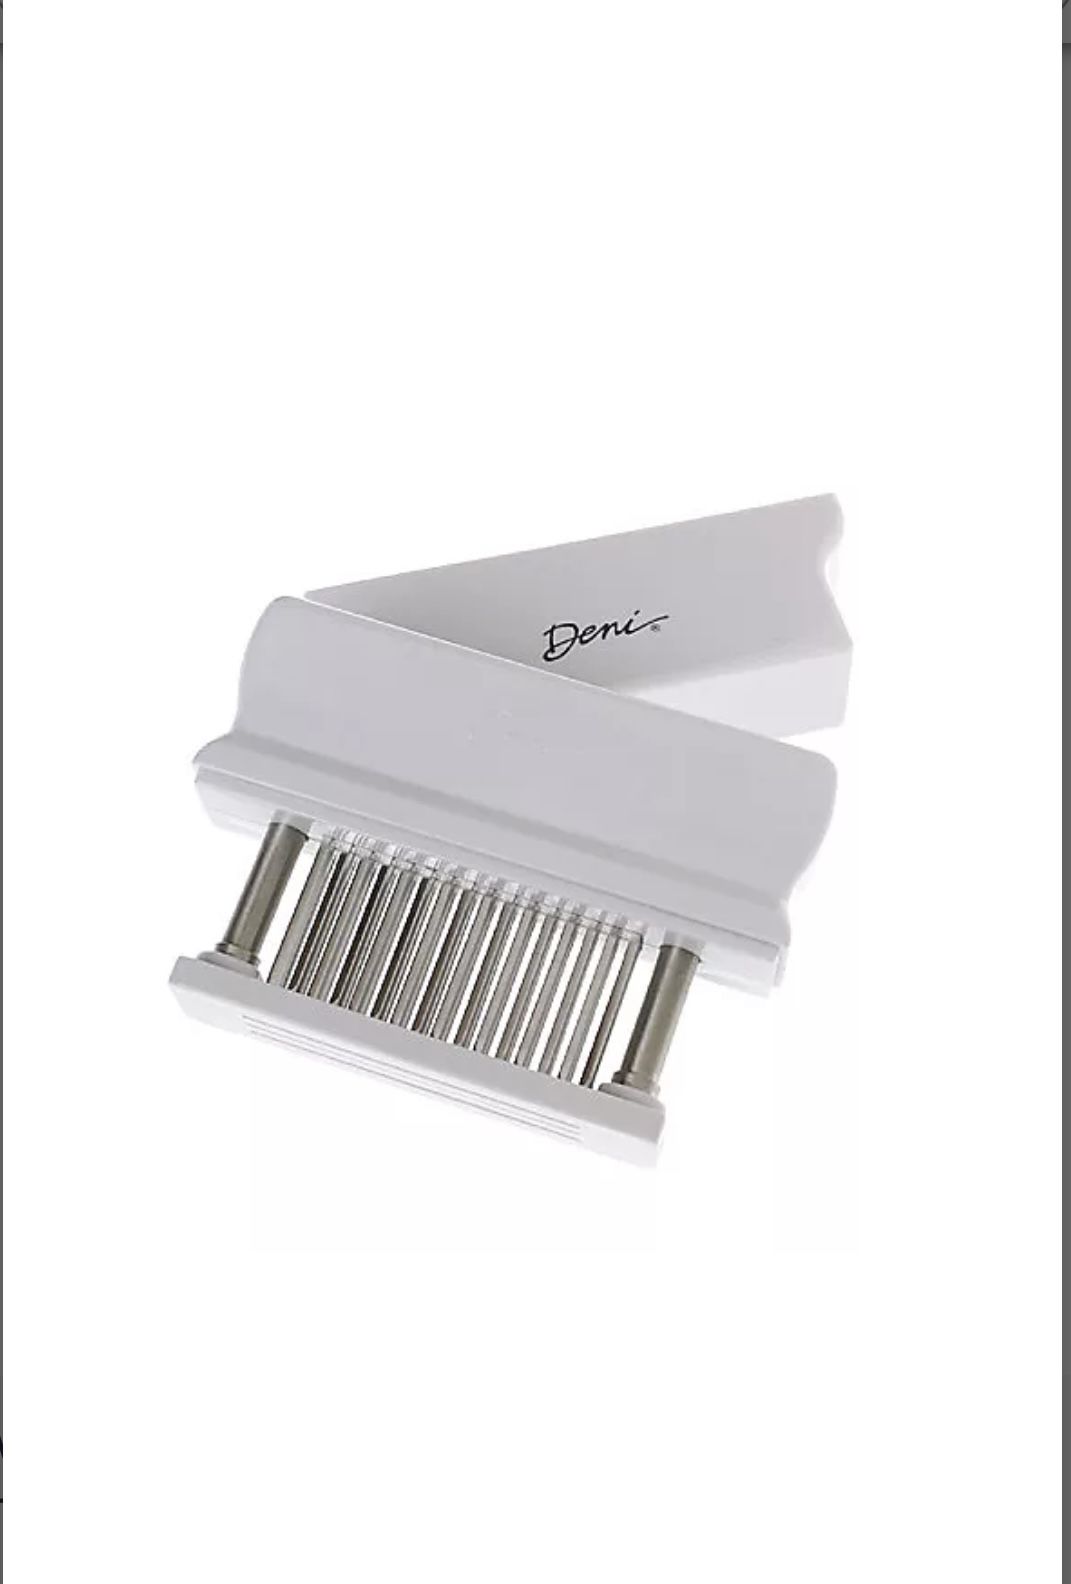 Deni , Meat Tenderizer With 48 Stainless Steel Blades & Protective Cover